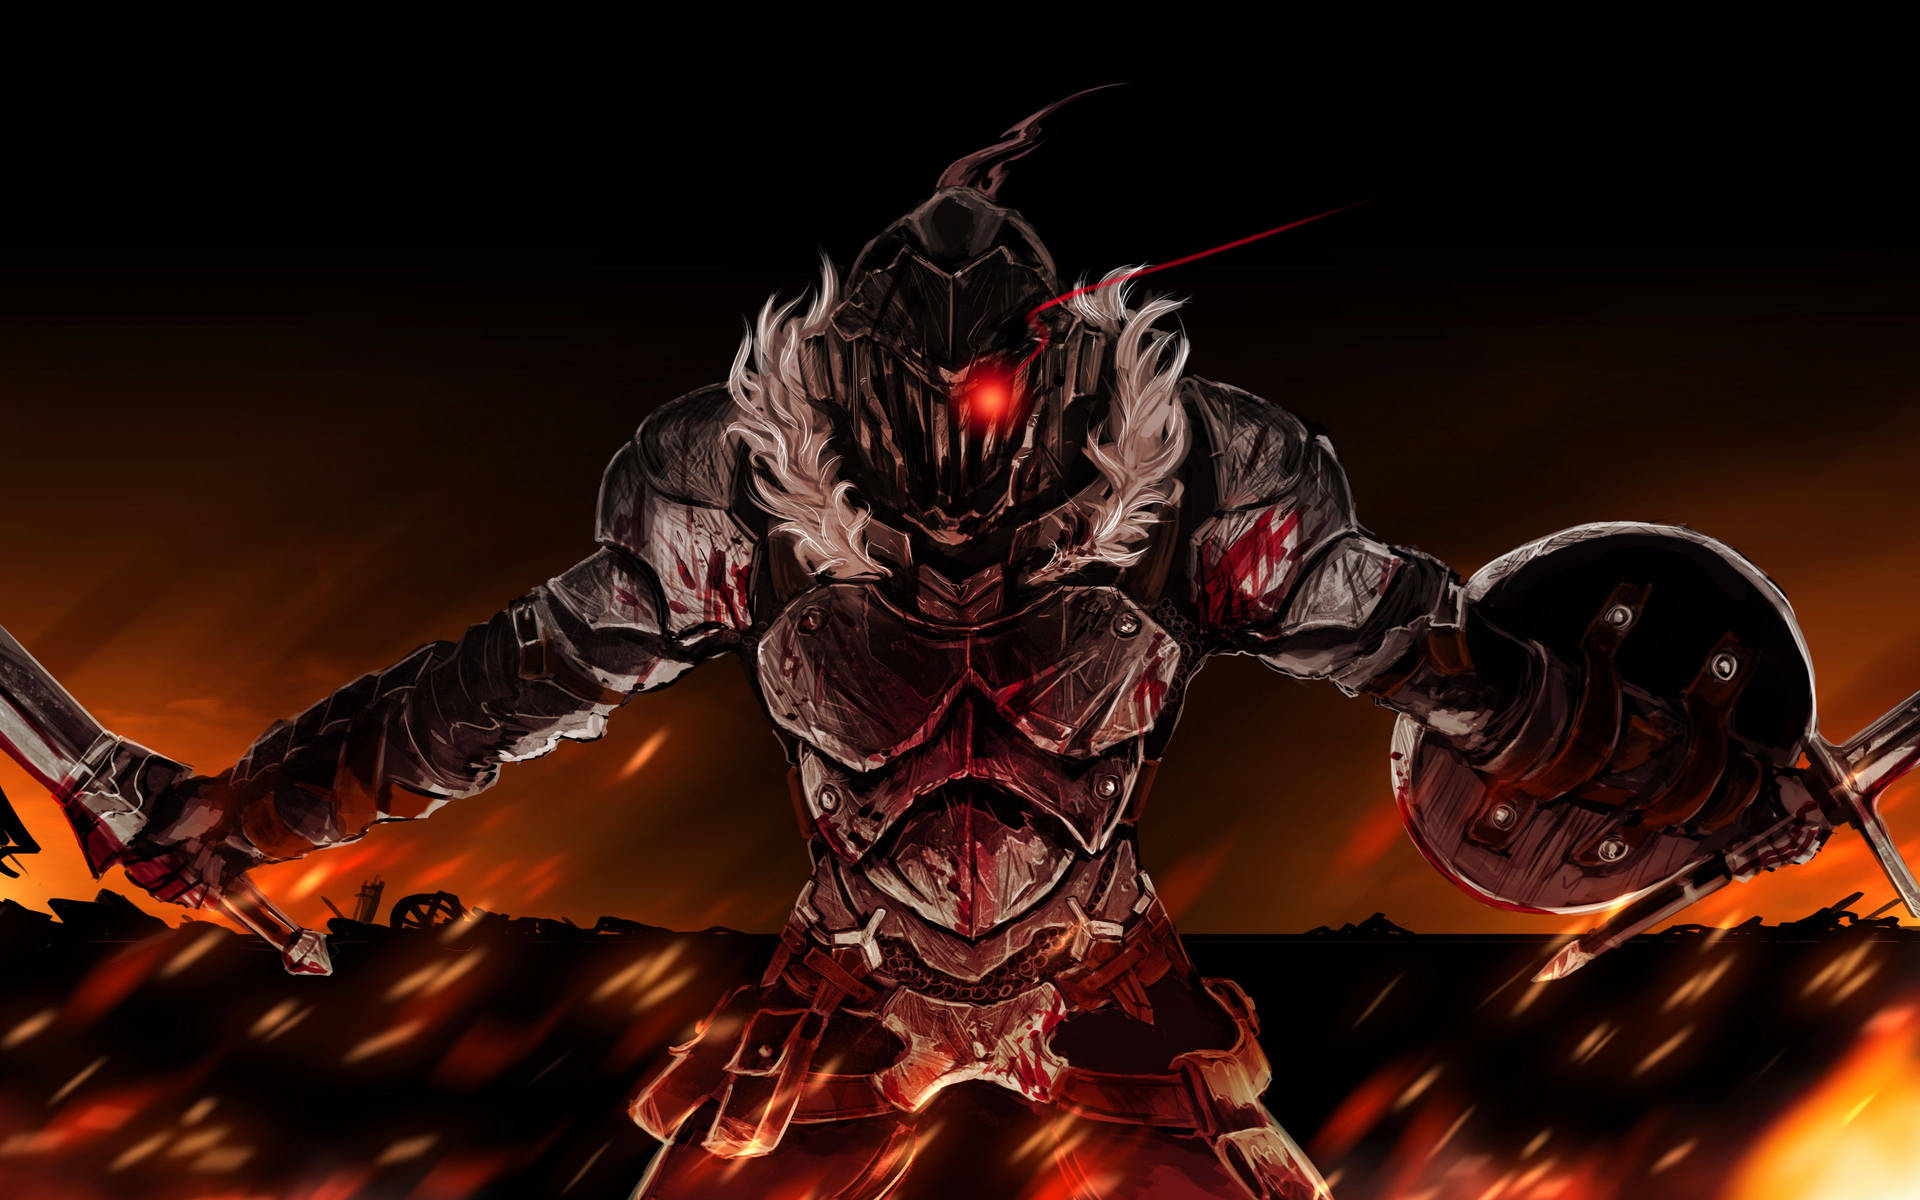 “Goblin Slayer Rides To Justice” Wallpaper